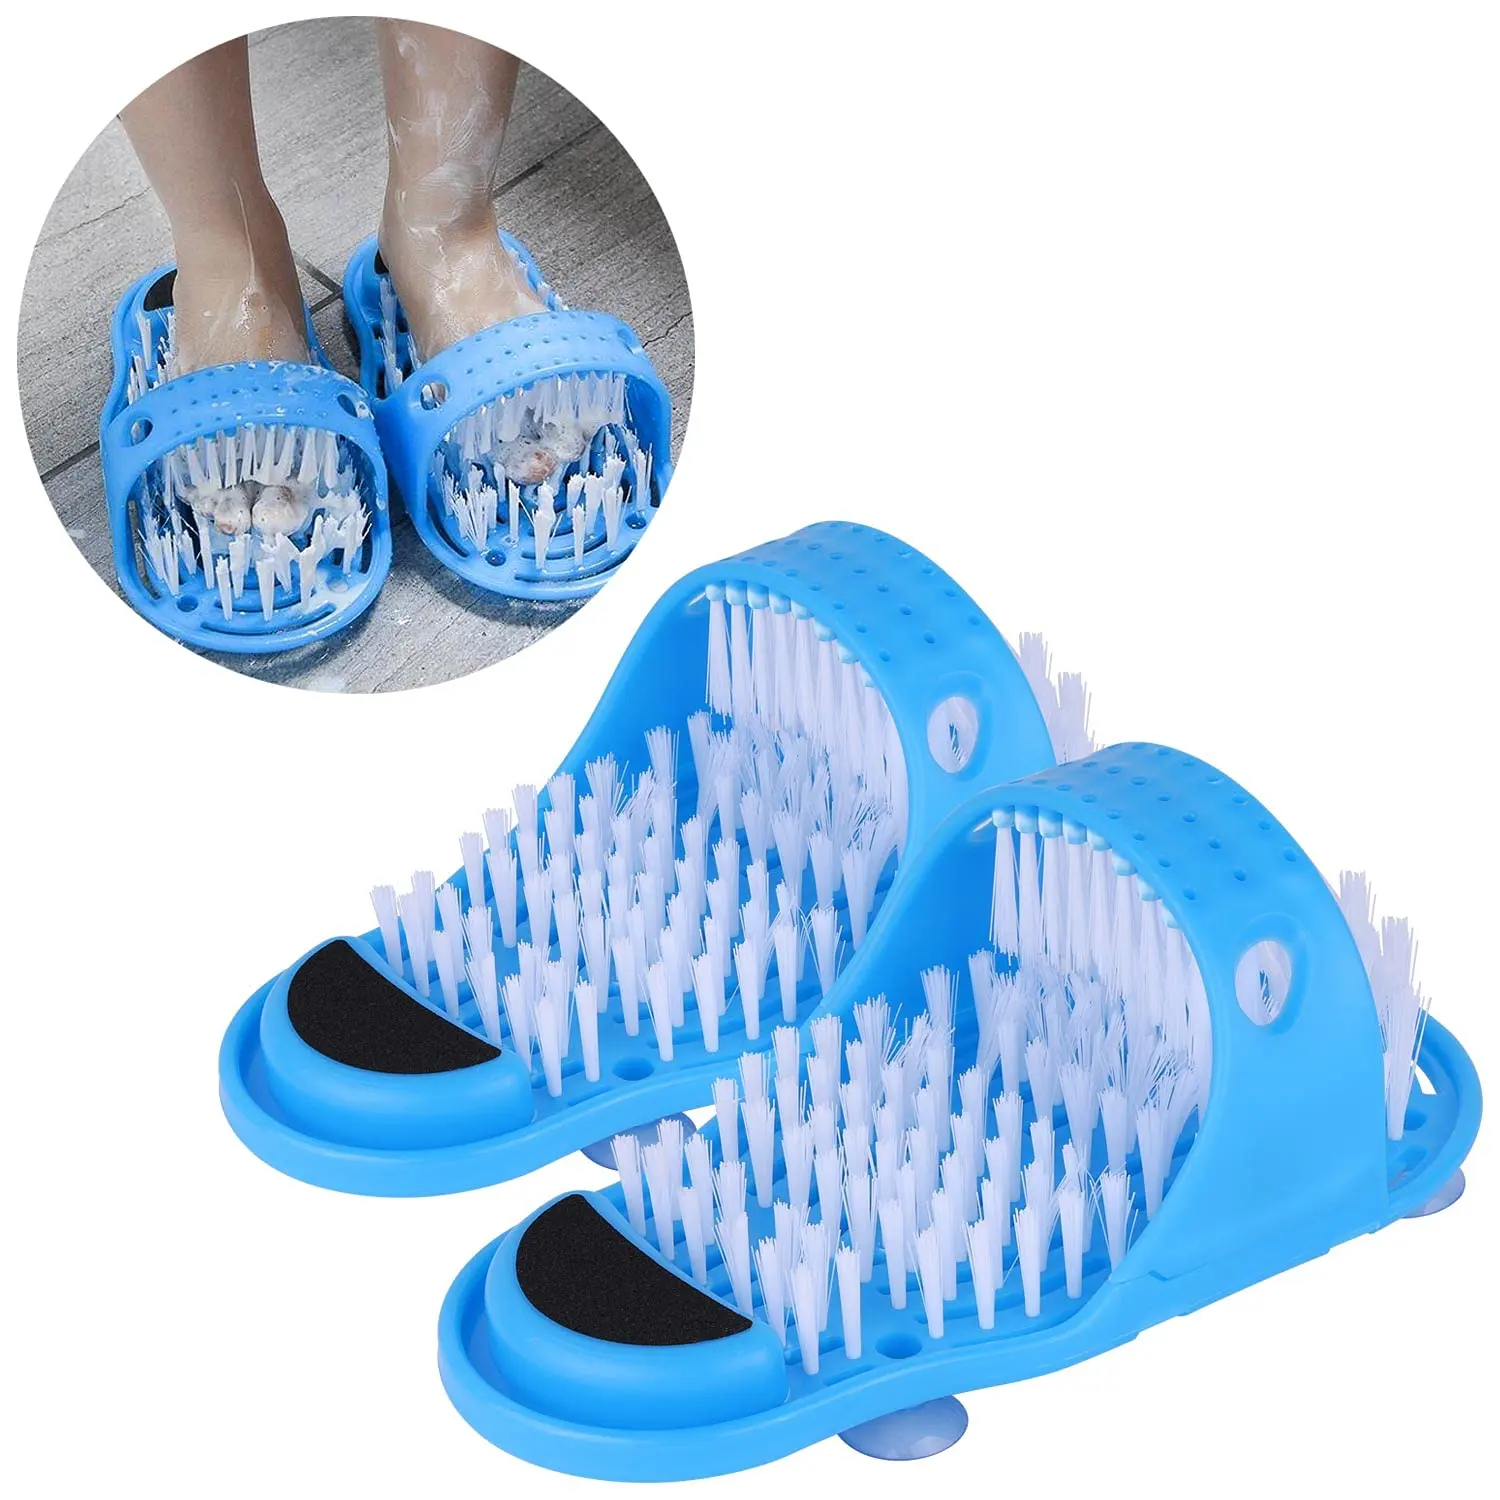 Magic Foot Scrubber Feet Cleaner Washer Brush for Shower Floor Spas Massage, Slipper for Exfoliating Cleaning Foot 1 Pair